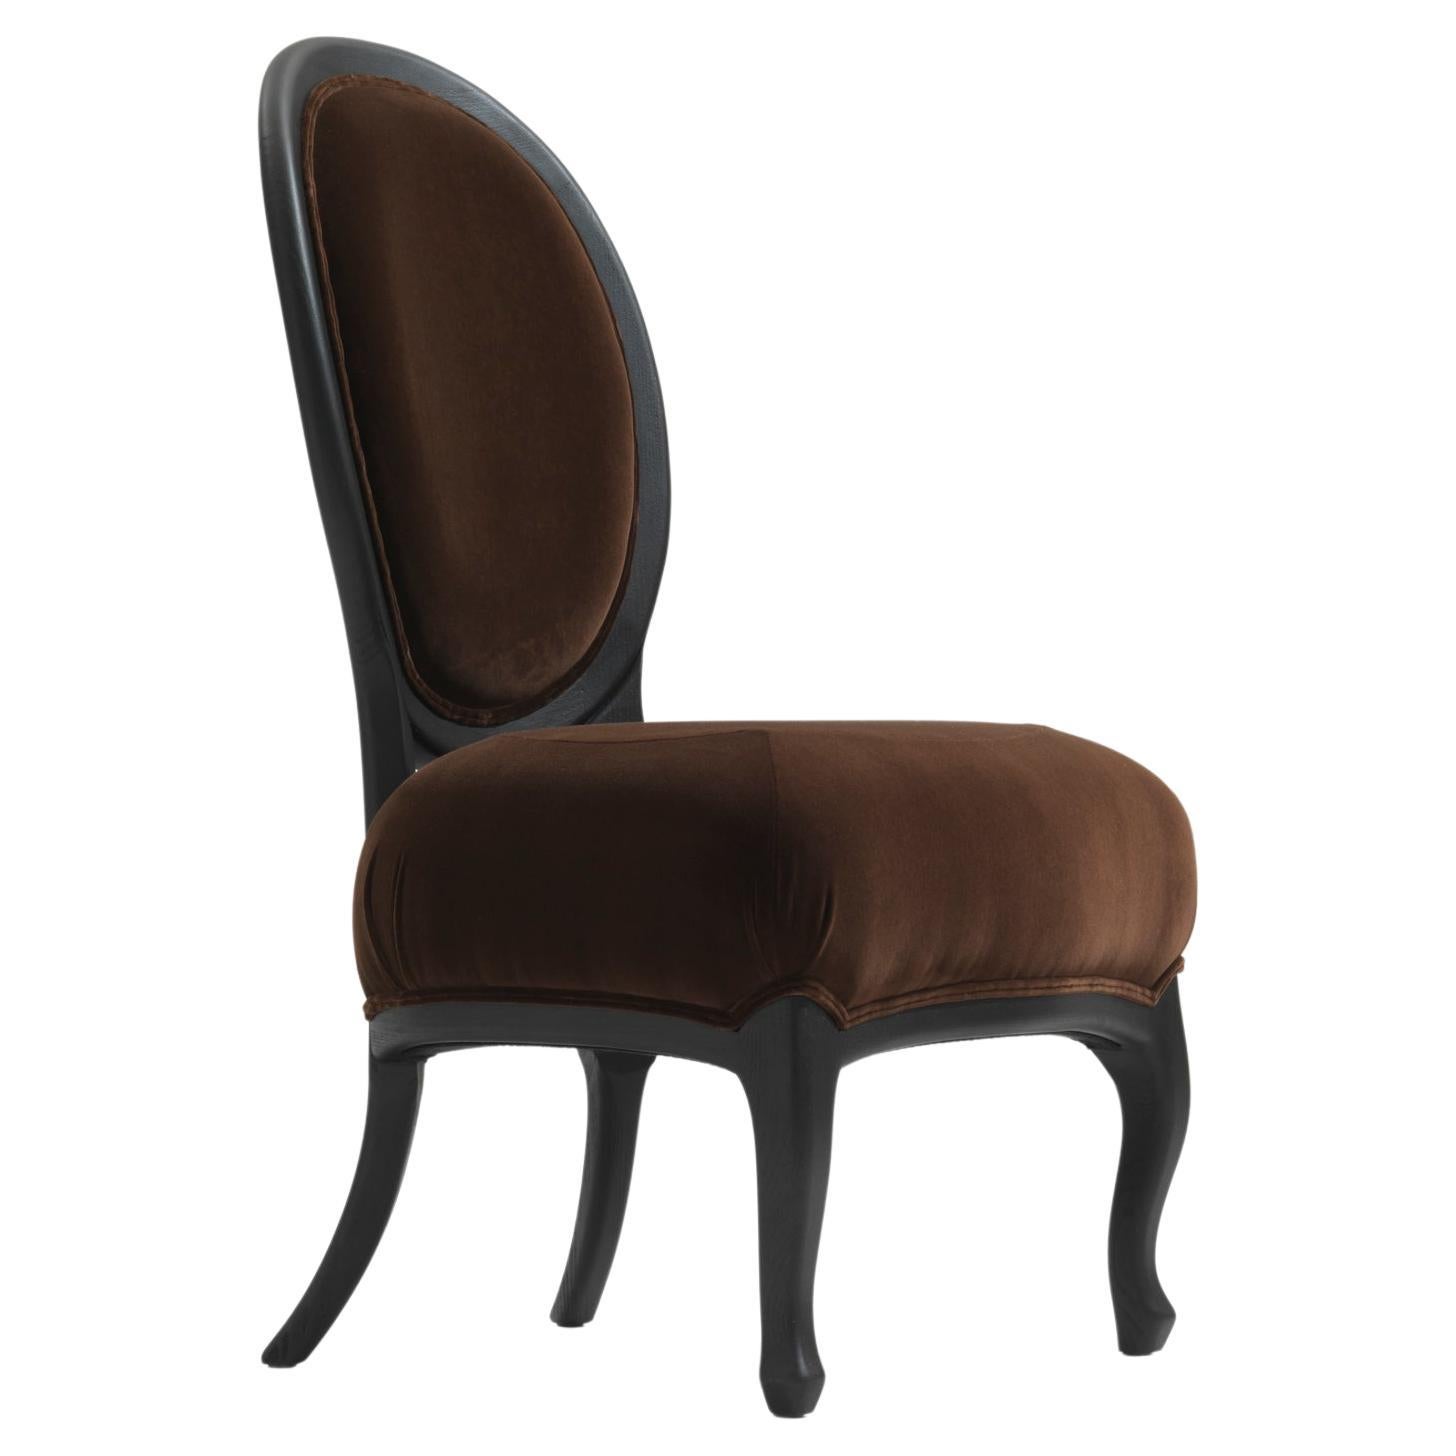 RUBENS Brown Velvet Dining Chair In Solid Wood by Nigel Coats For Sale